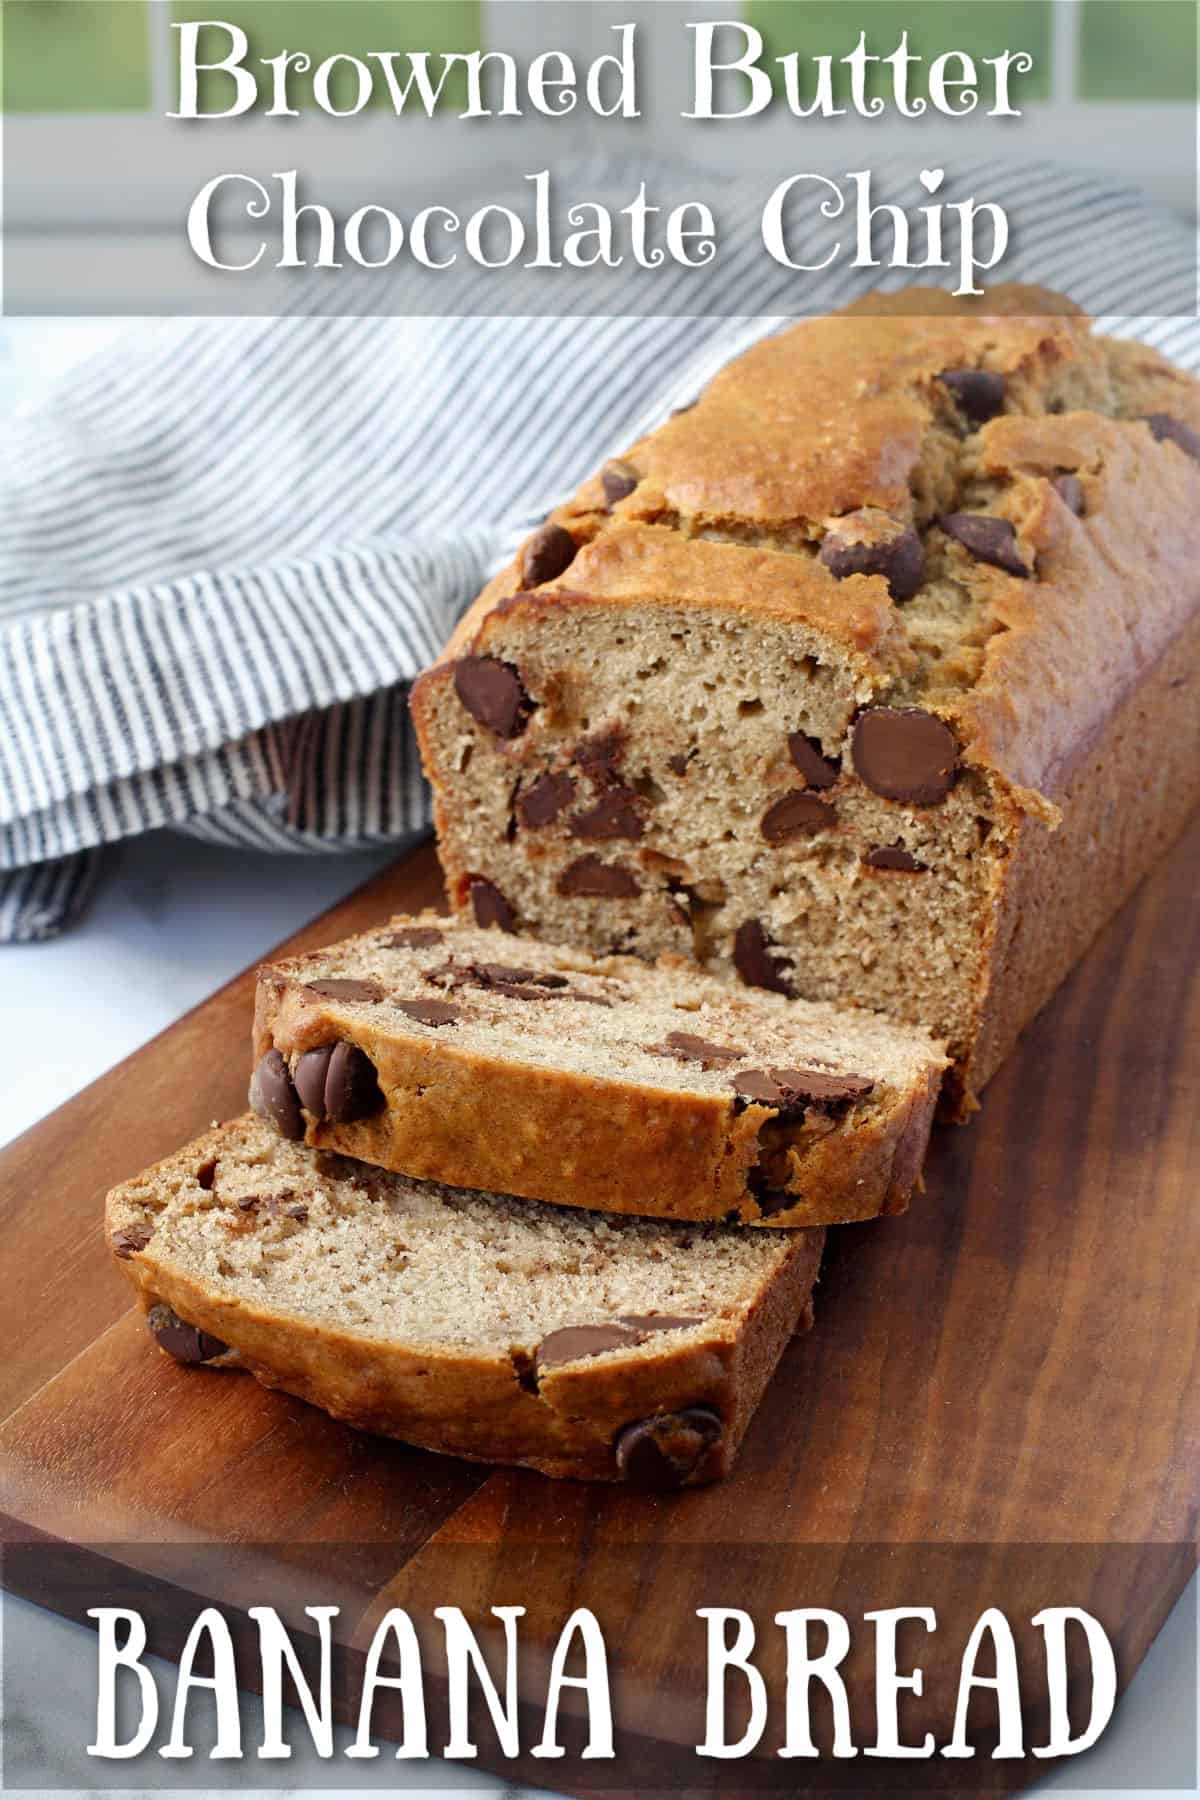 Browned Butter Chocolate Chip Banana Bread